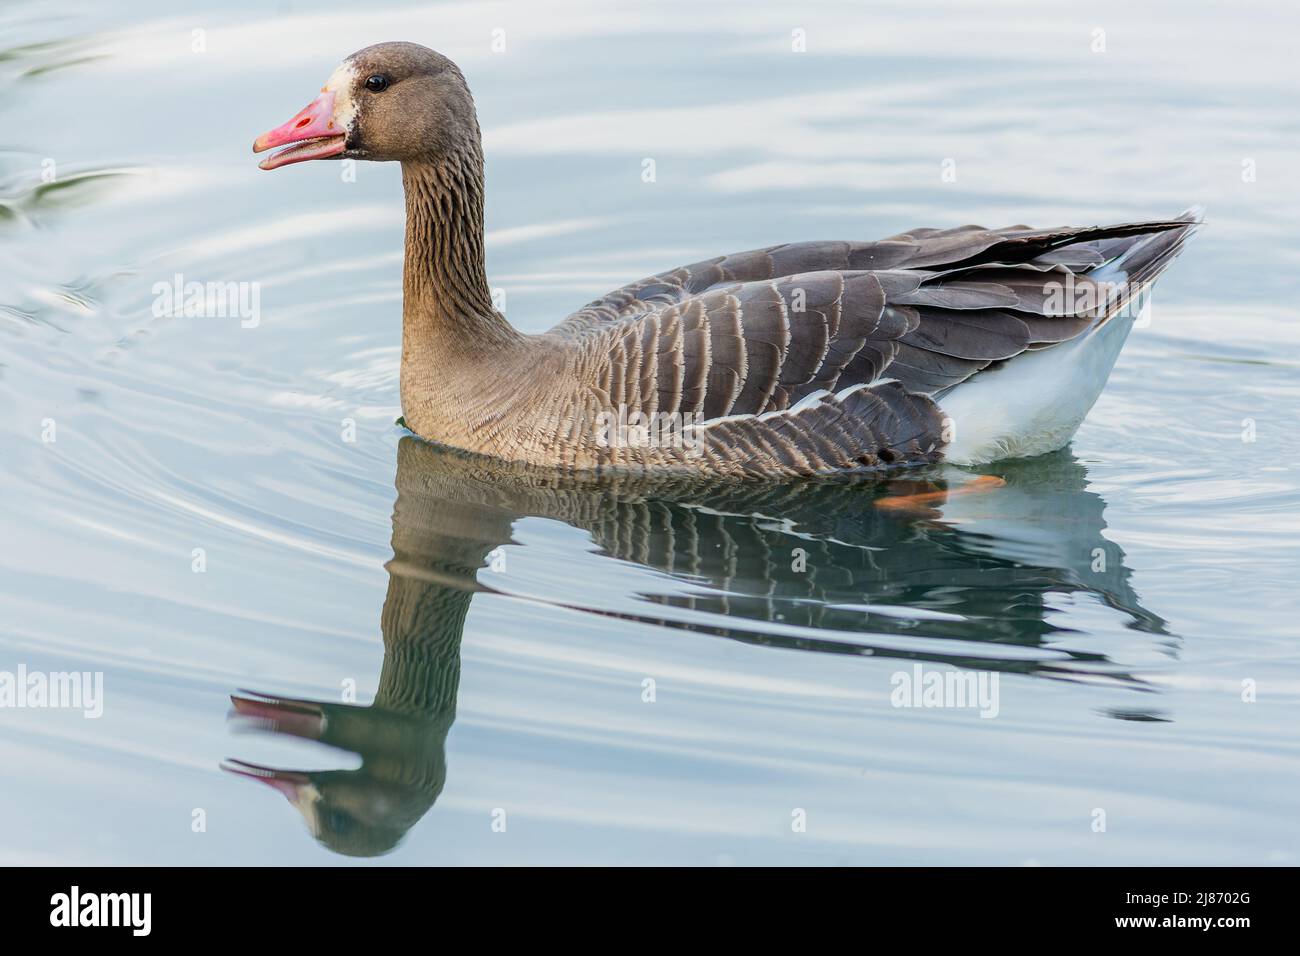 Close up image of the greater white-fronted goose with pink beak swimming in a lake. Reflection of the bird in blue water. Stock Photo